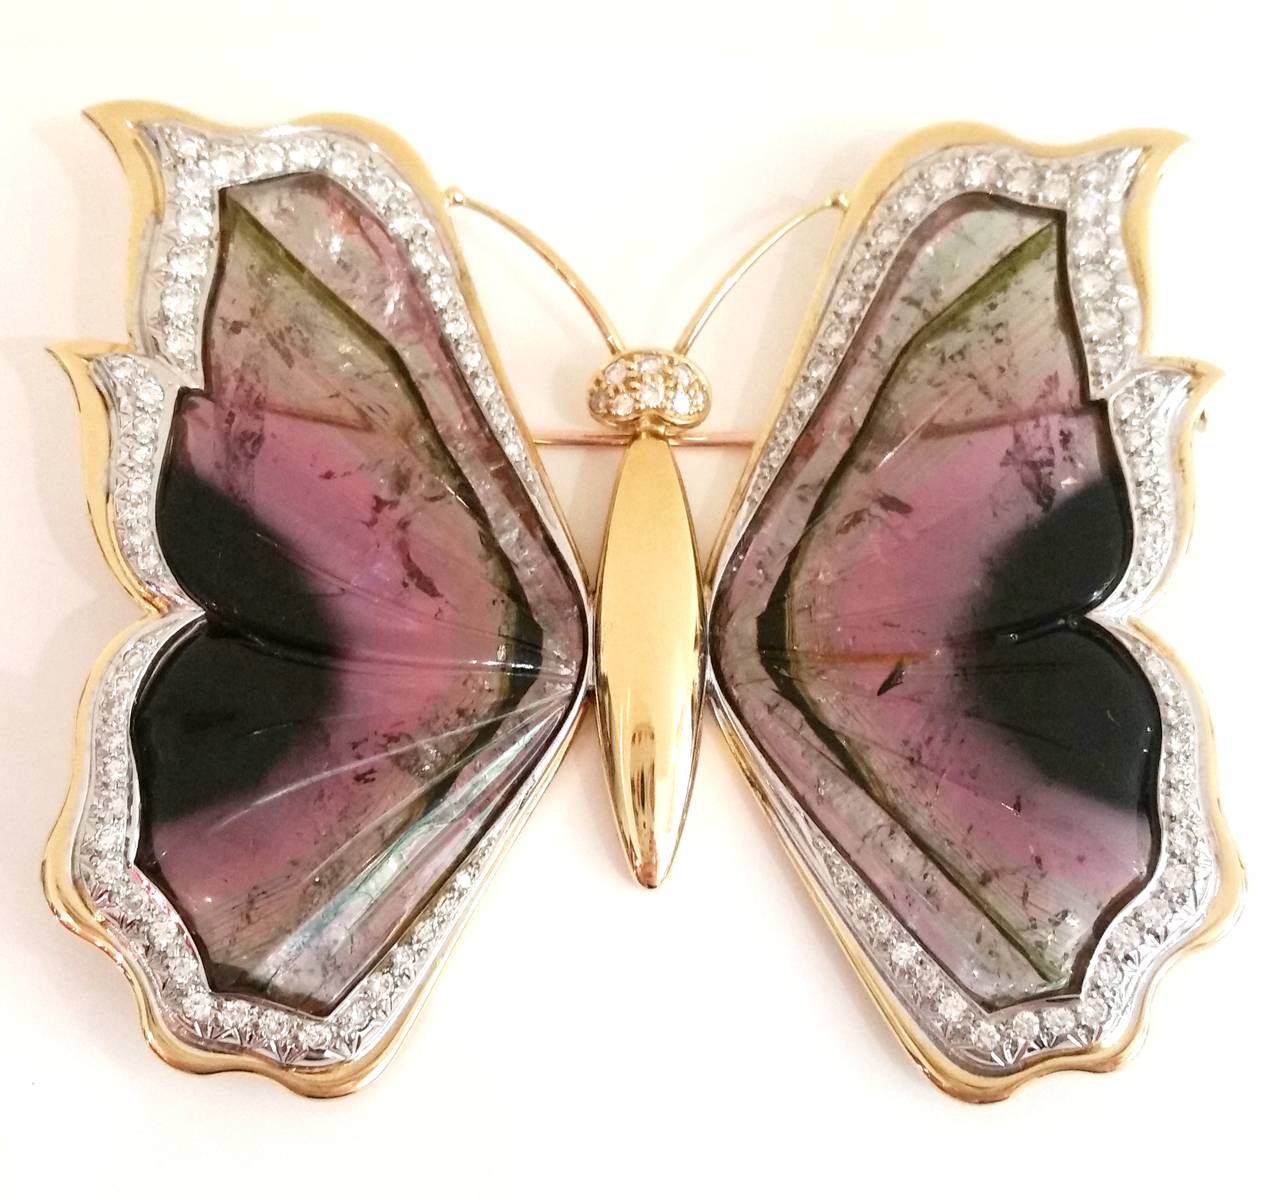 Signed by Spanish jeweller Rosa Bisbe
18k white and yellow gold with brilliant cut diamonds (total weight 3.18ct approx.) and beautiful watermelon tourmaline depicting the butterfly's wings

Measurements:
Brooch  7.5 x 6.5 cm
Earrings 4.5 x 3.3